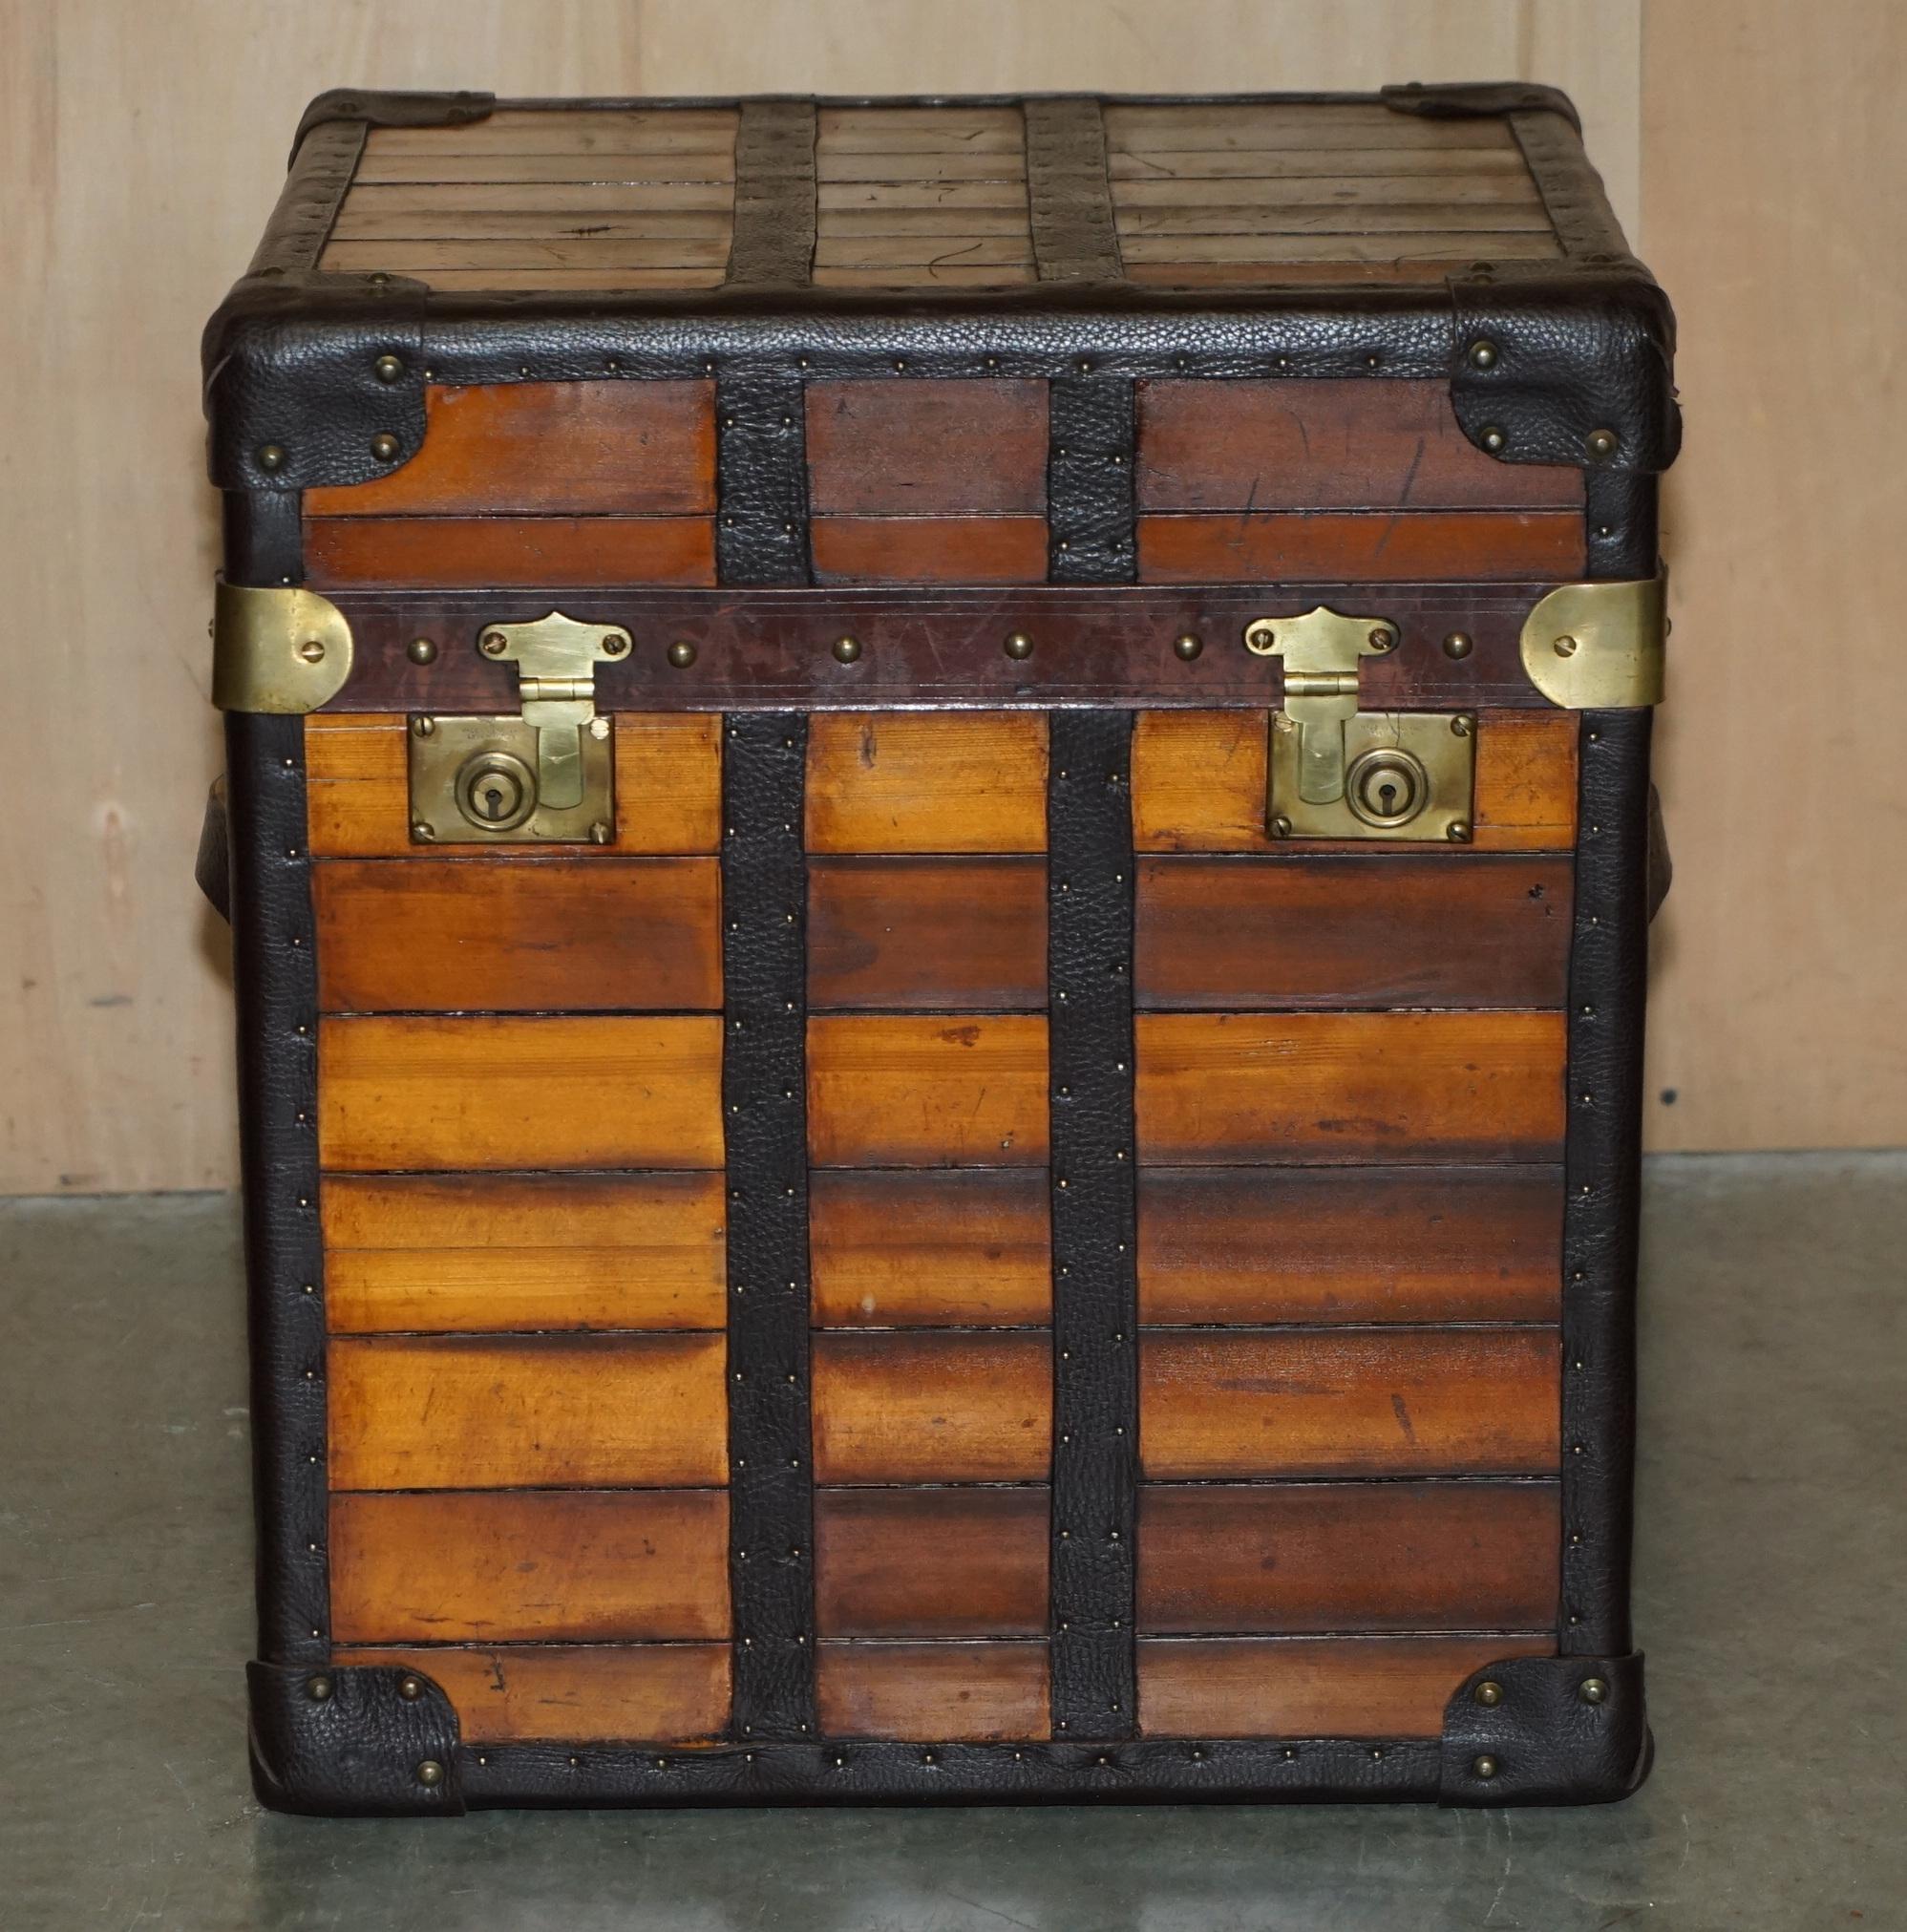 Victorian PAIR OF STUNNING ViNTAGE ENGLISH SIDE TABLES STORAGE TRUNKS SLATTED WOOD LEATHER